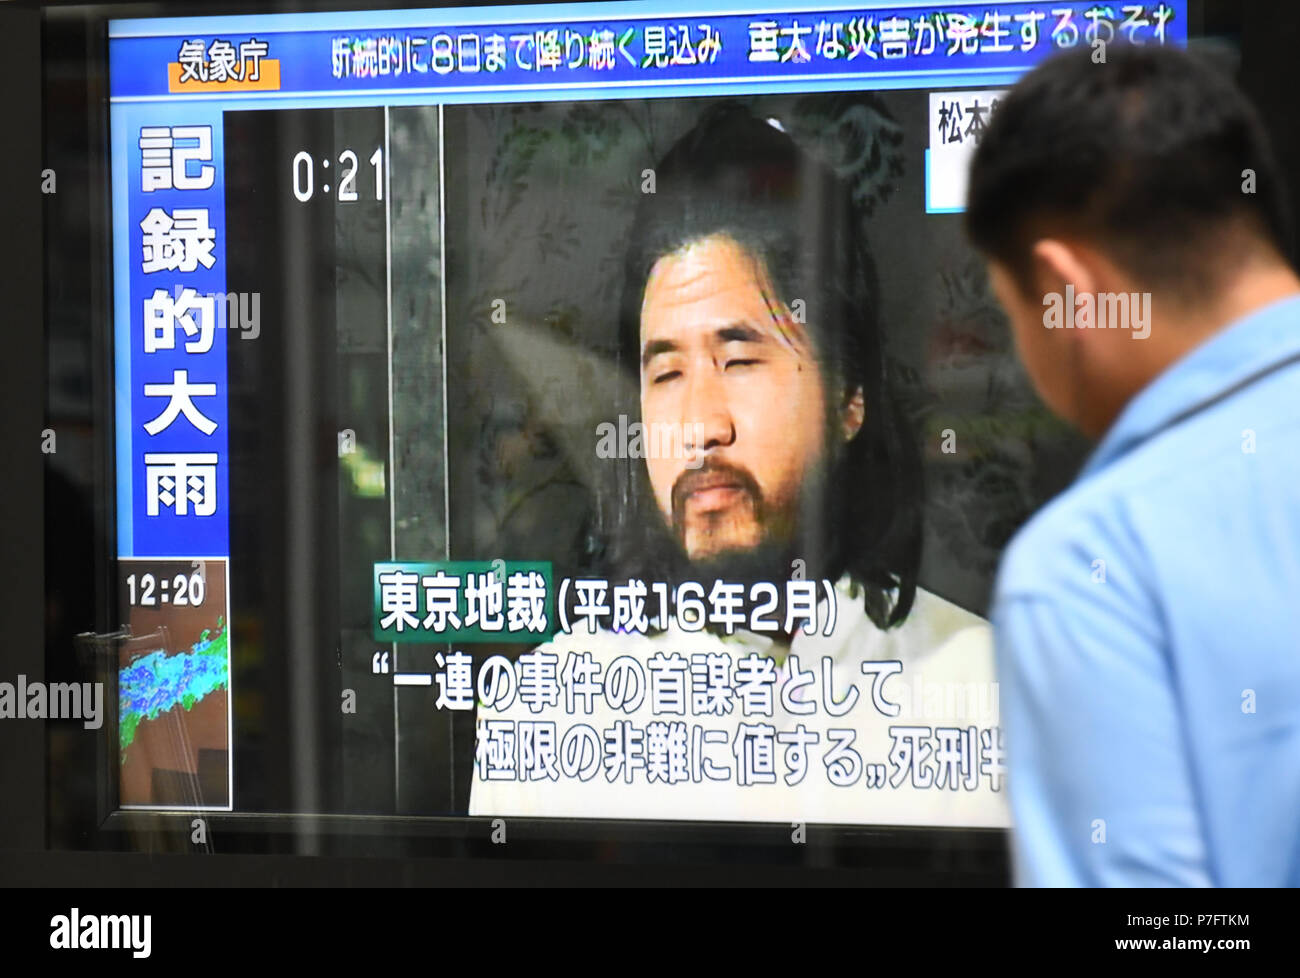 Tokyo, Japan. 6th July, 2018. A pedestrian watchs news flash on TV in Tokyo, reporting the execution of a cult leader and six of his followers on Friday, July 6, 2018. Shoko Asahara, founder of the doomsday cult Aum Shinrikyo and mastermind behind the deadly 1995 nerve gas attack on the Tokyo subway system among other crimes in the 1980s and 90s, was executed on Friday. Six other condemned Aum members were also executed separately. Credit: Natsuki Sakai/AFLO/Alamy Live News Stock Photo